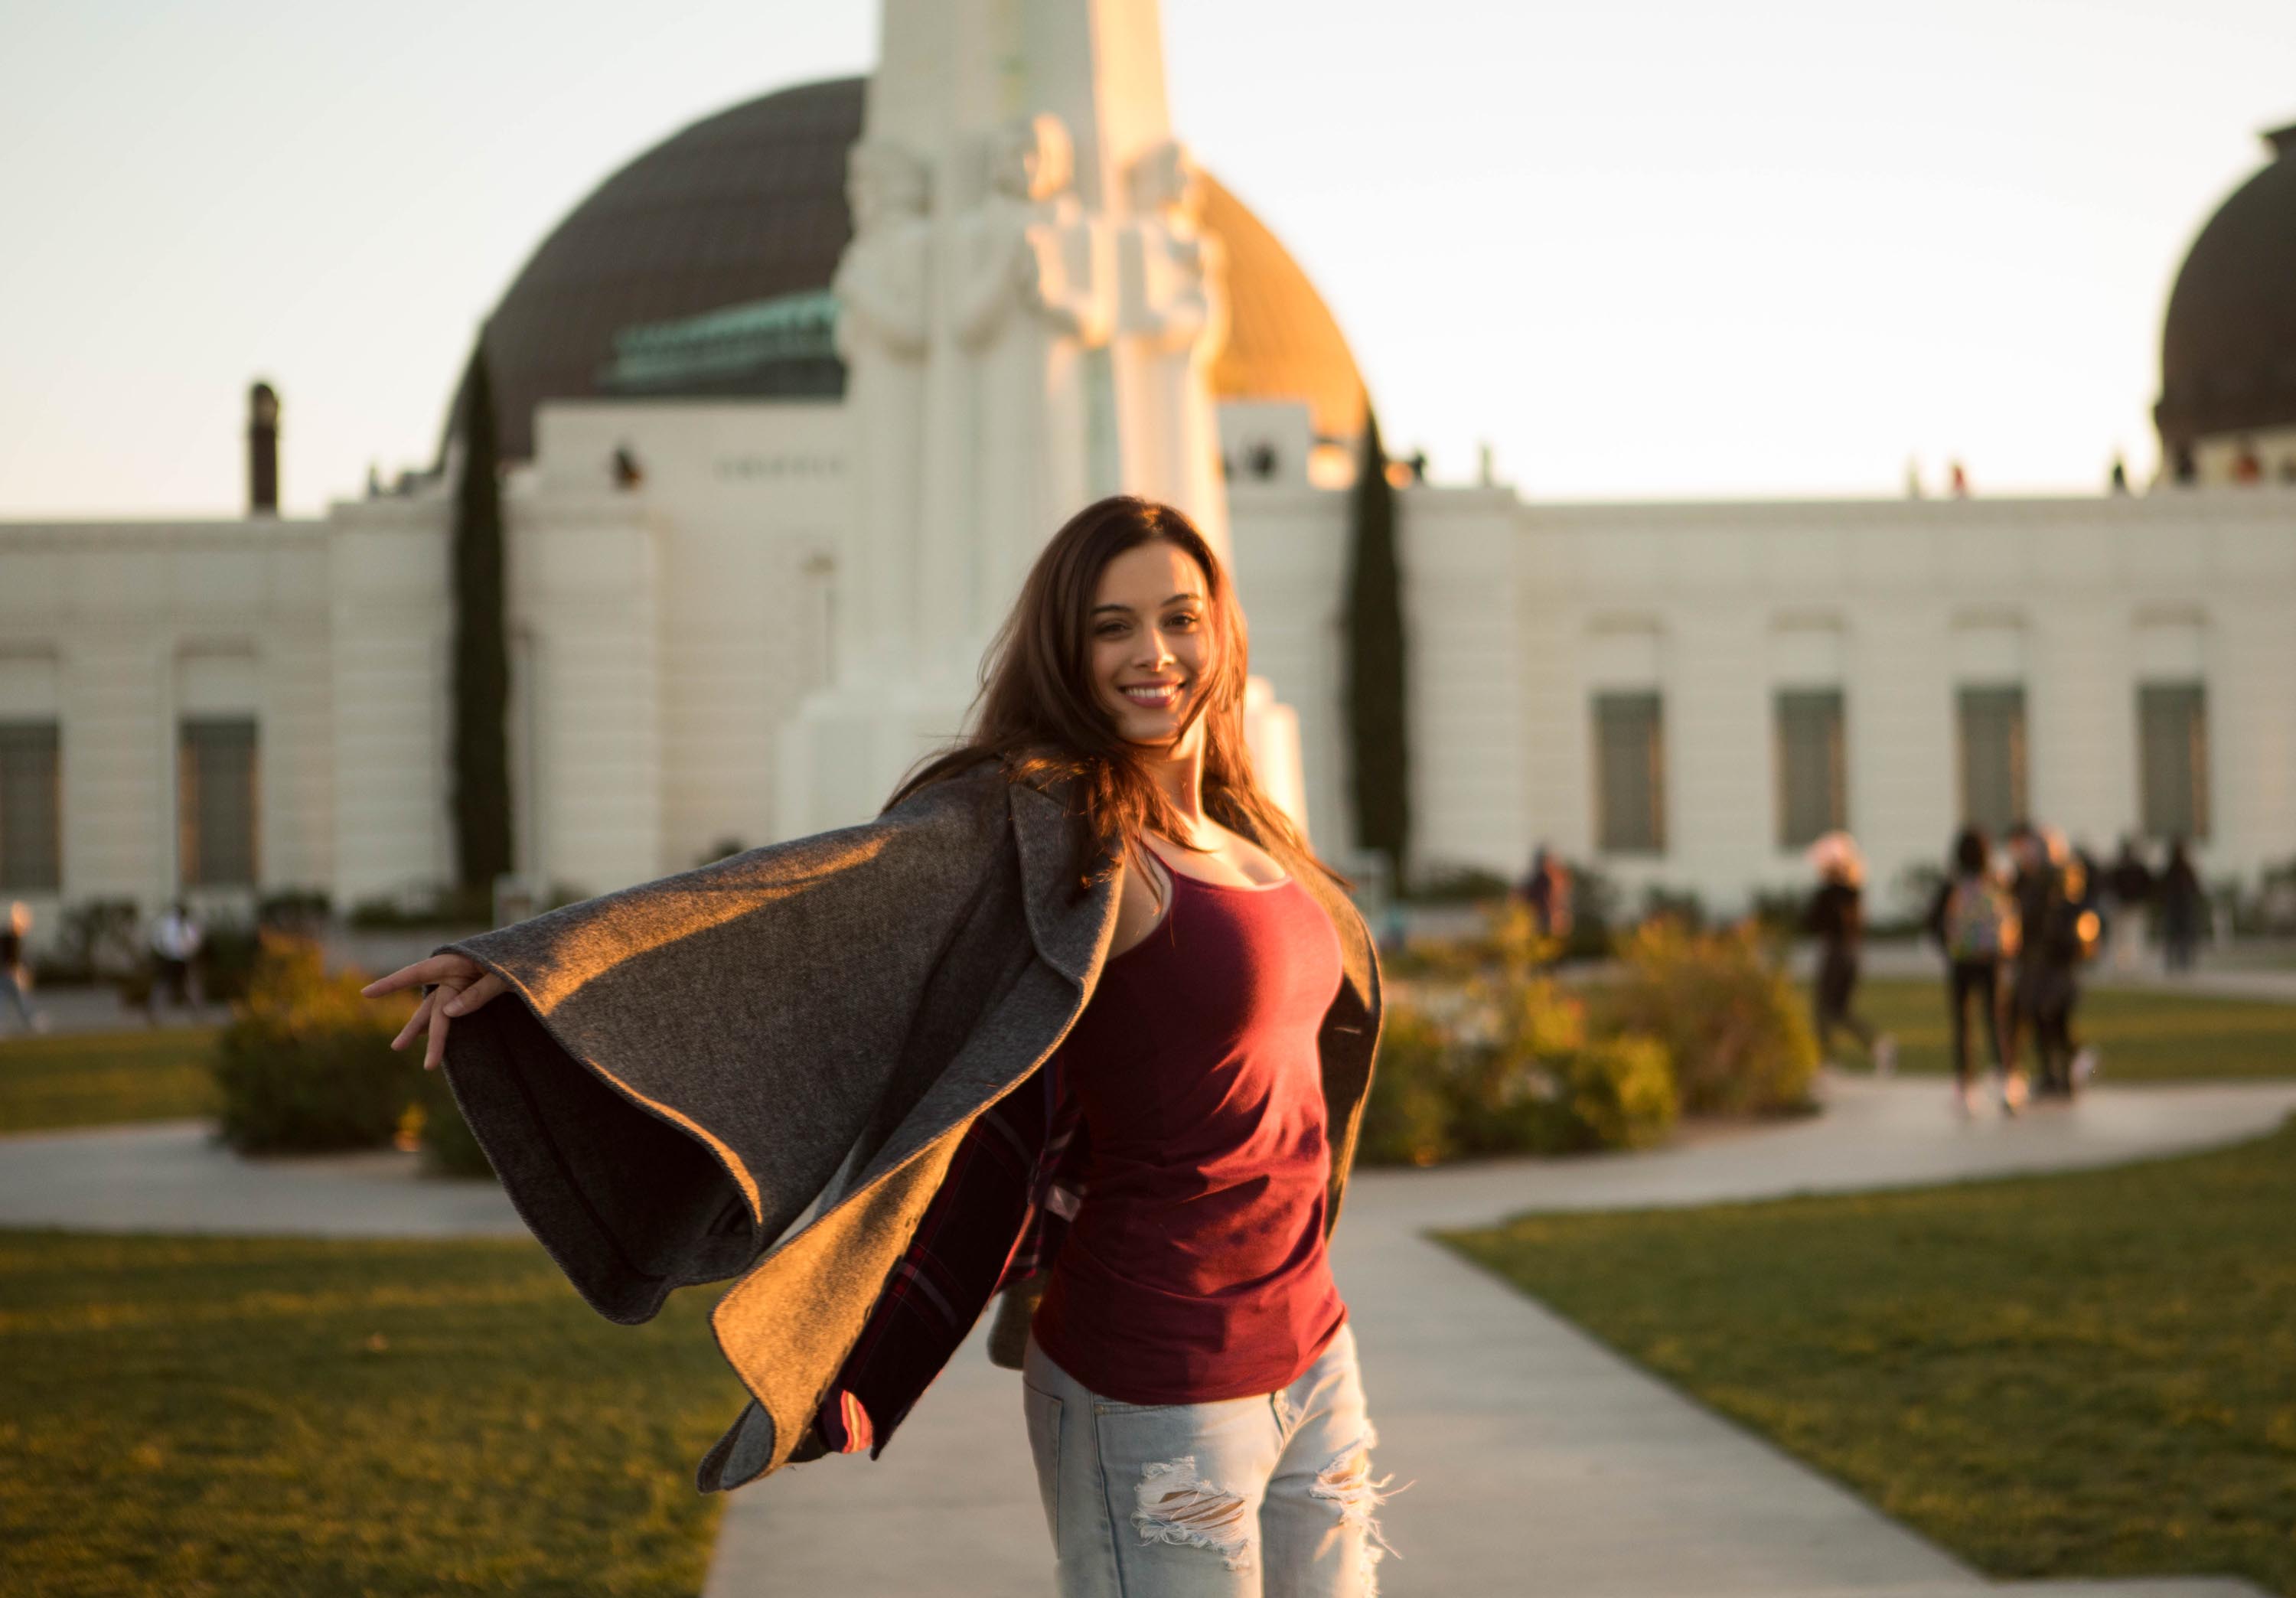 evelyn-sharma-at-the-griffith-observatory-dedicated-to-astronomy-education-for-the-general-public-at-la-southern-california